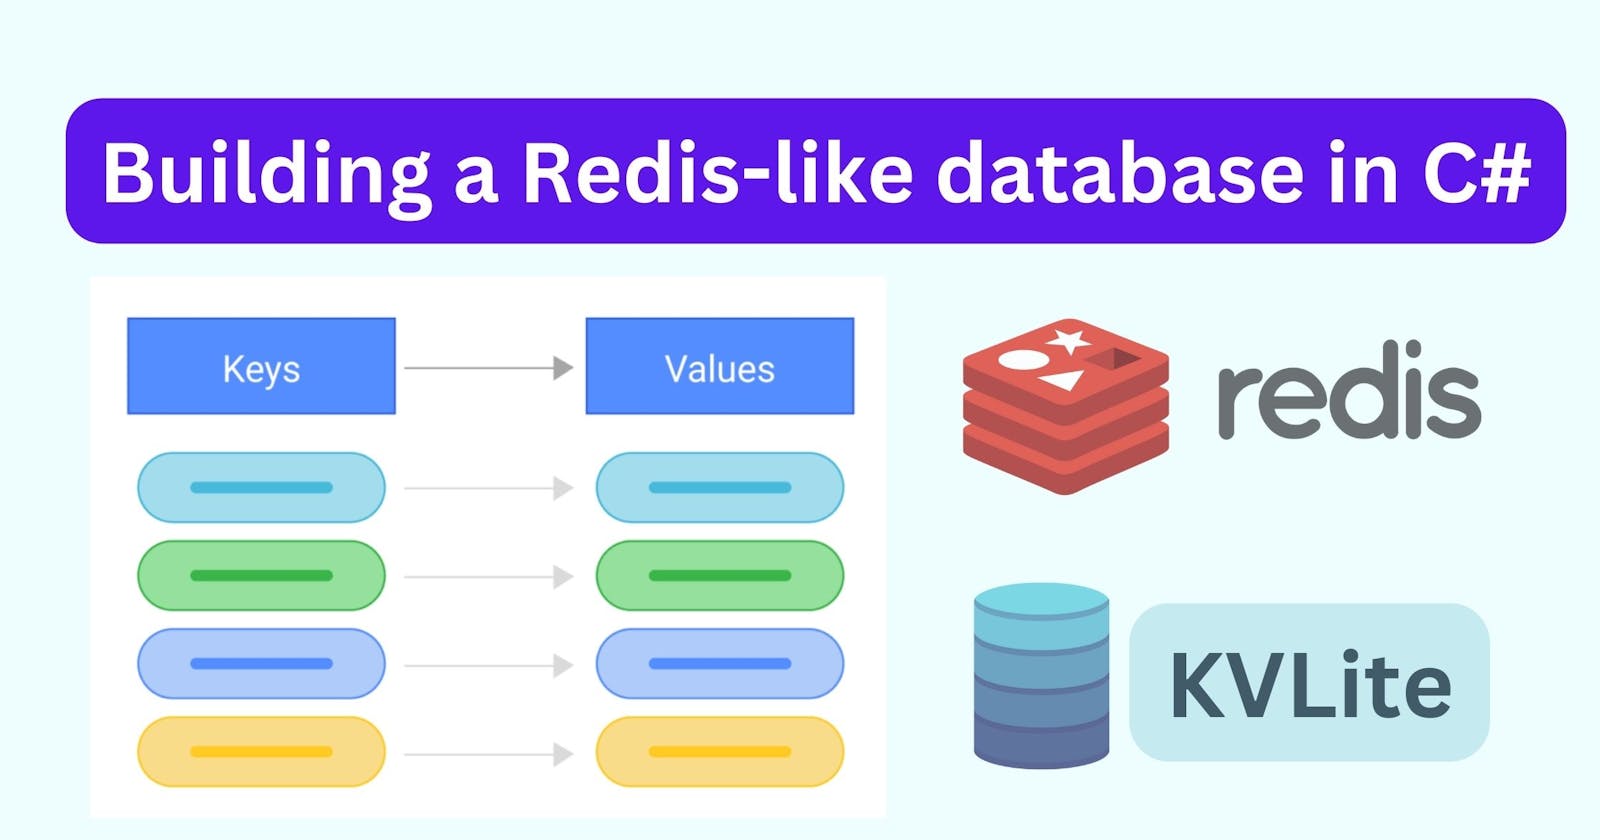 How to build a Redis-like database in C#